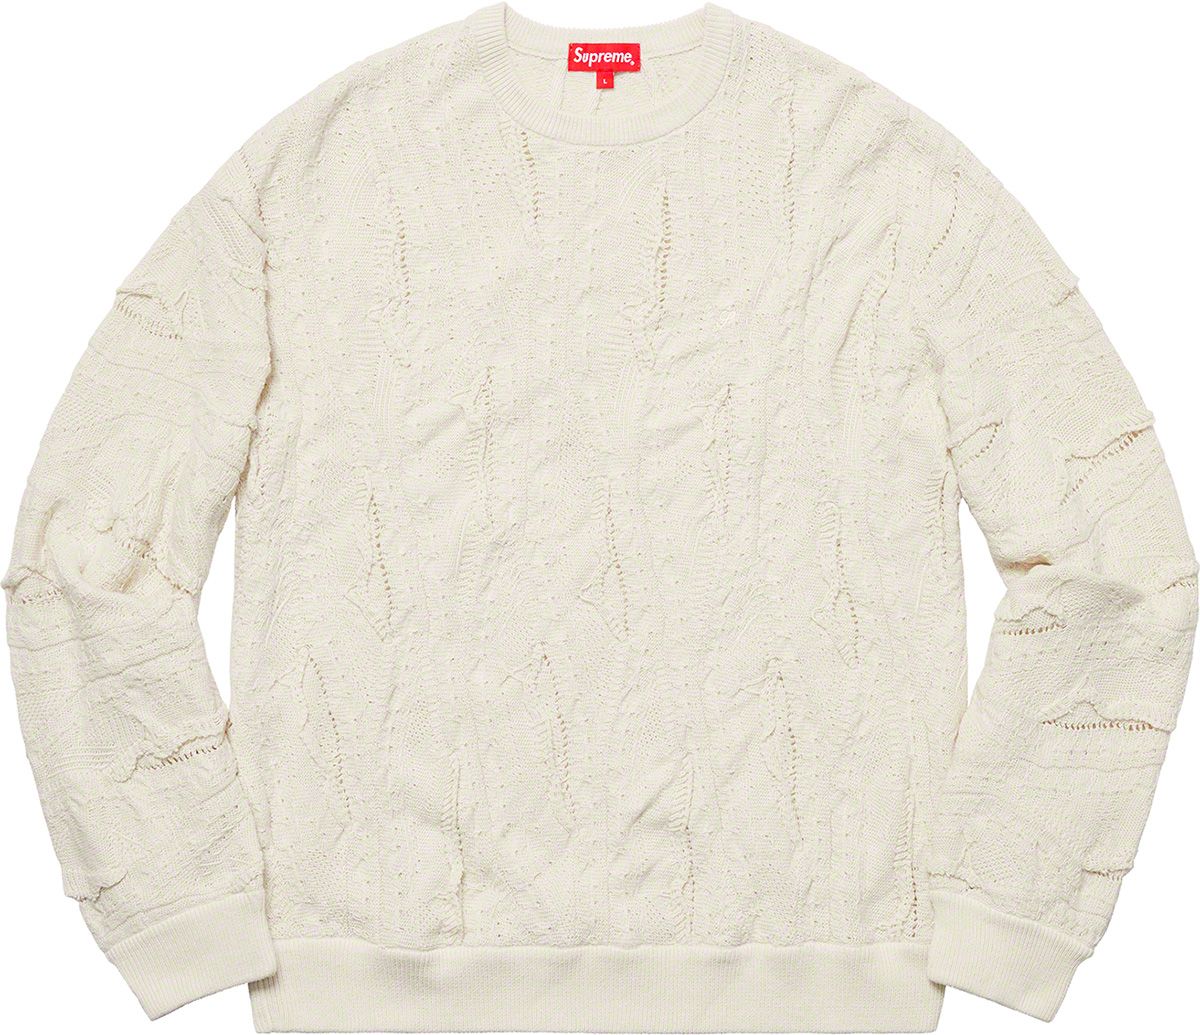 Tag Logo Sweater - Spring/Summer 2019 Preview – Supreme